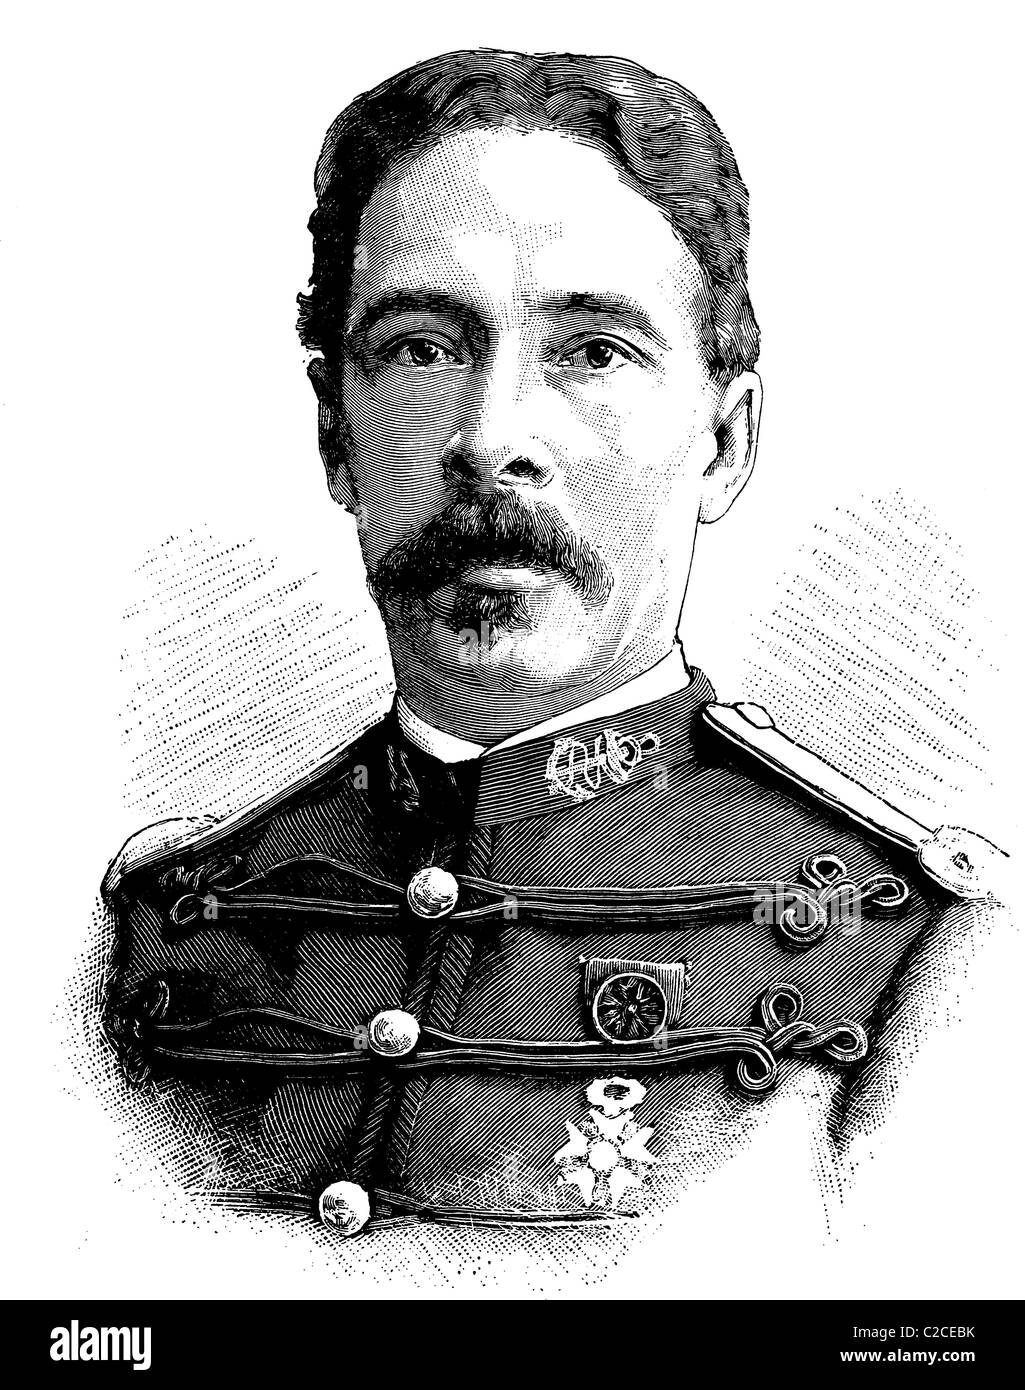 Alfred-Amédée Dodds, 1842 - 1922, French officer of the expeditionary corps in the Second Franco-Dahomean War in West Africa, hi Stock Photo